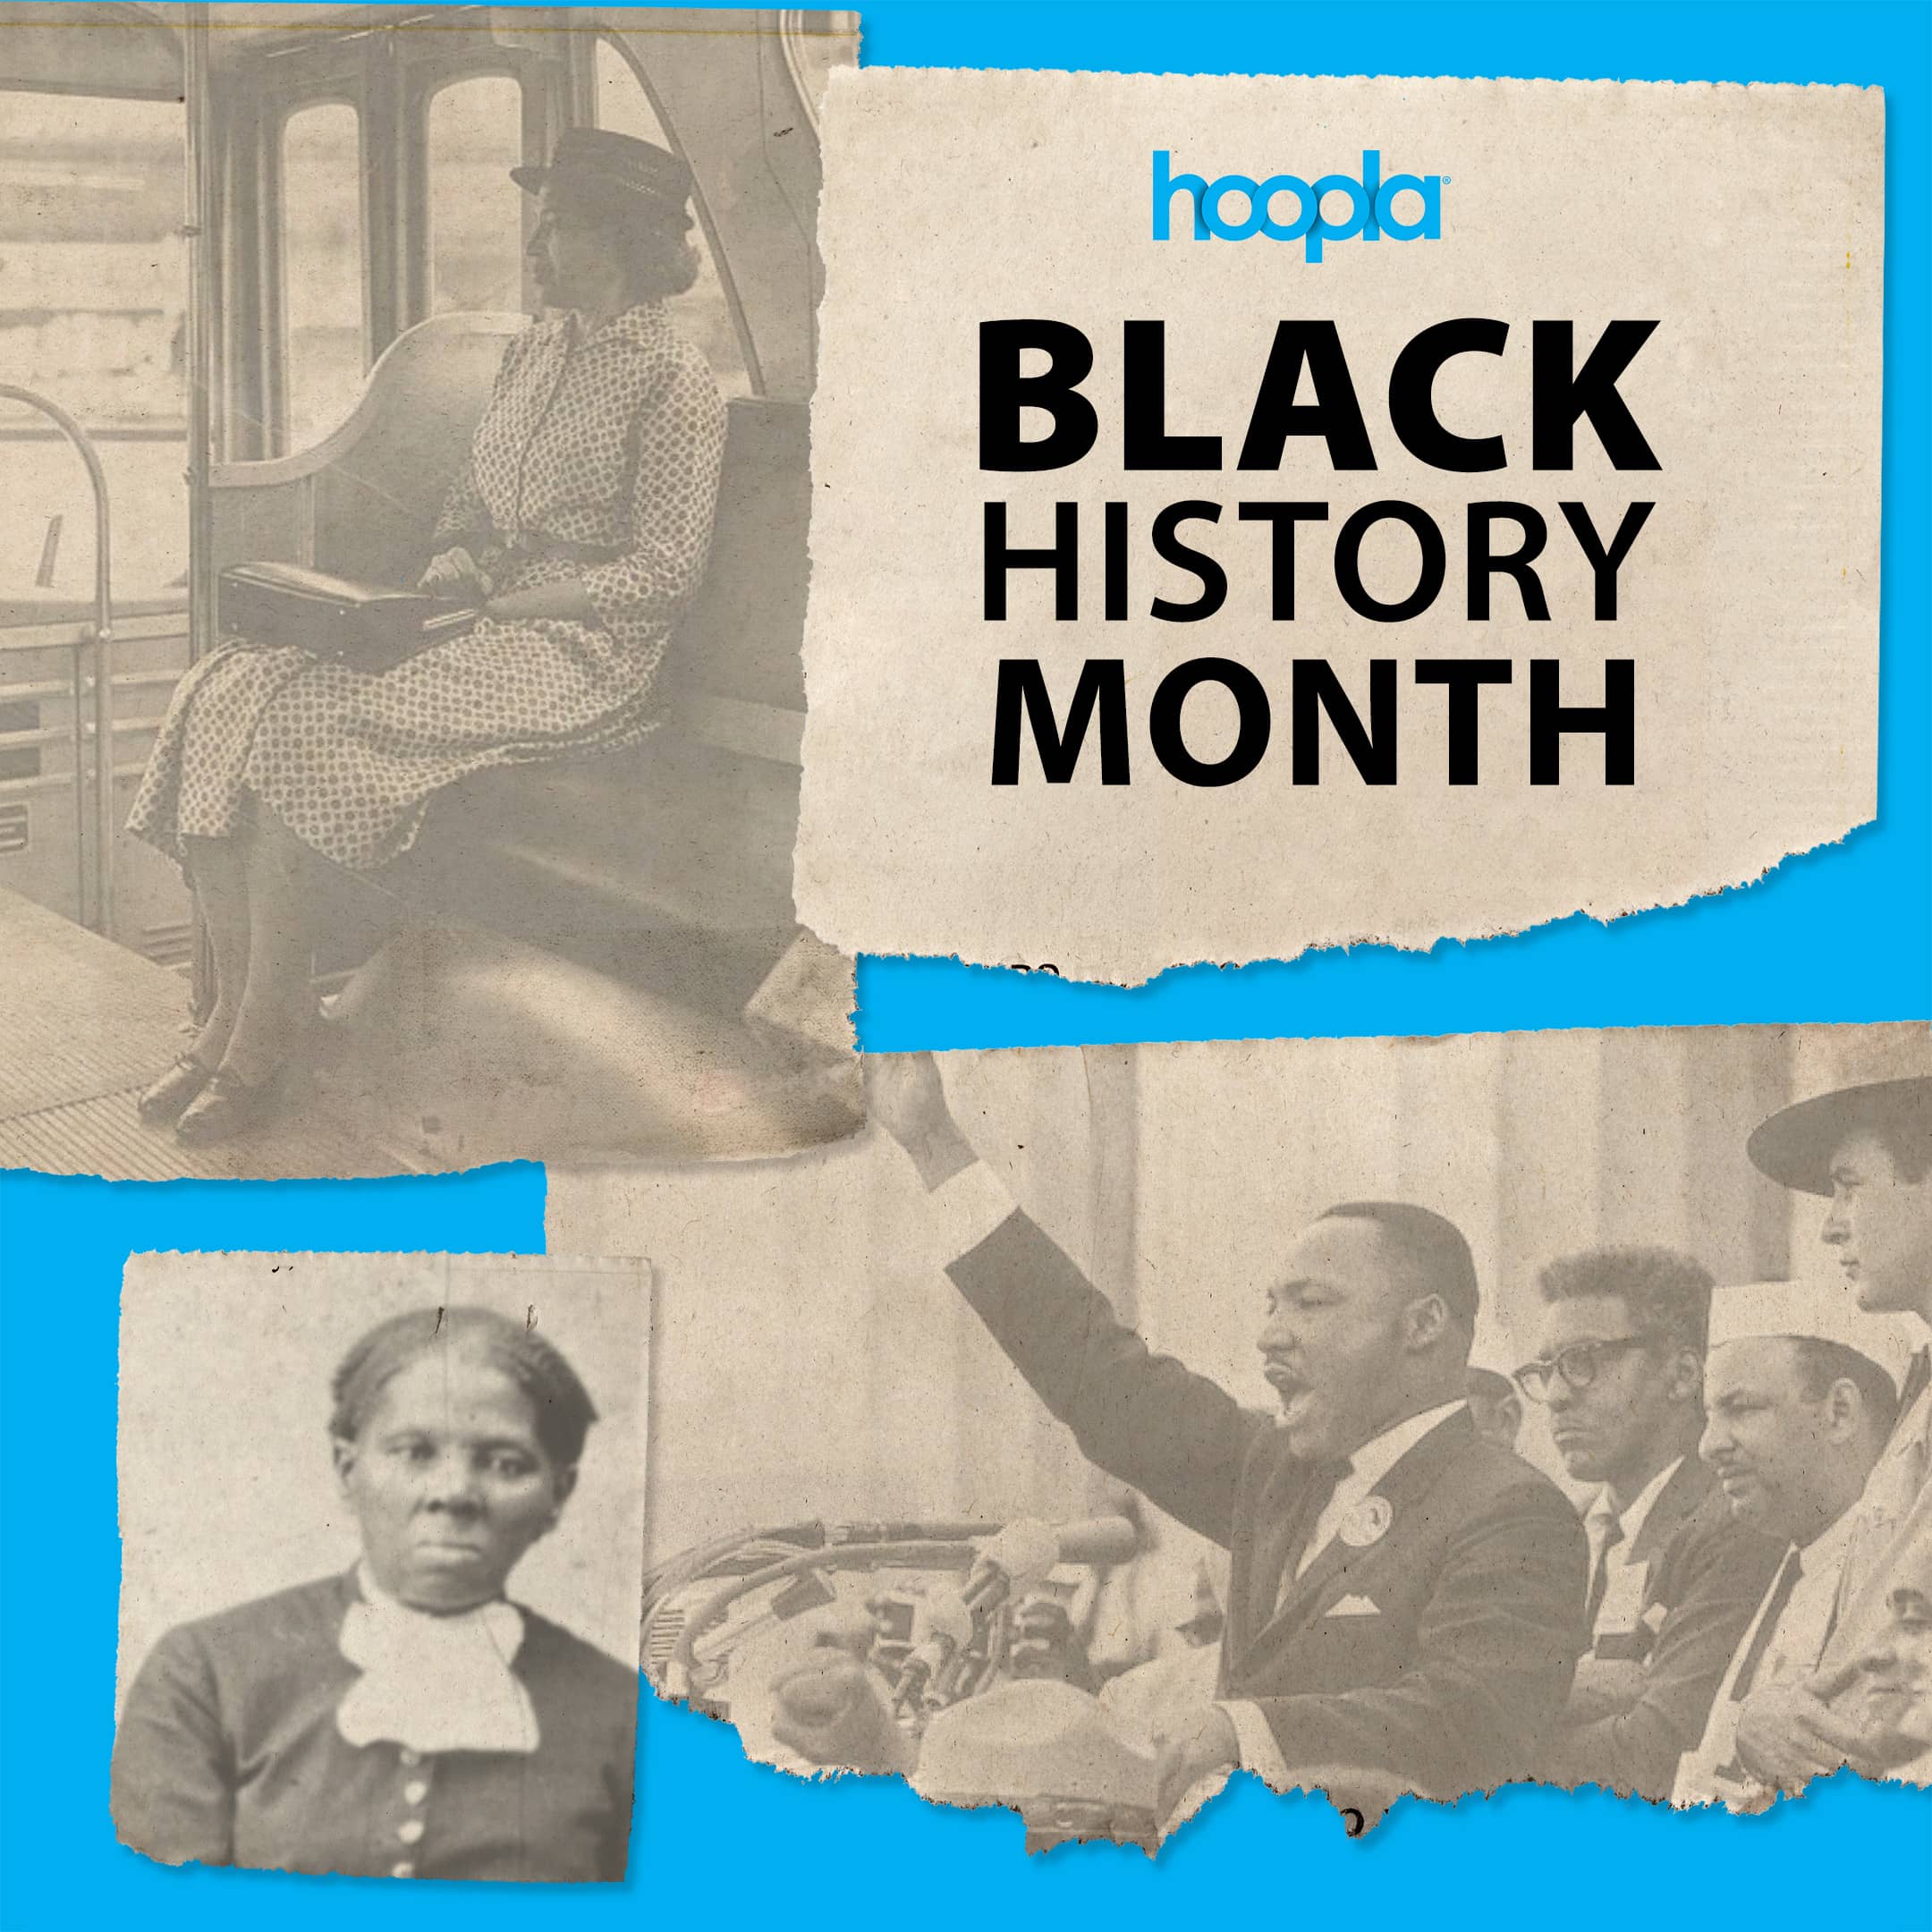 hoopla's Black History Month collection